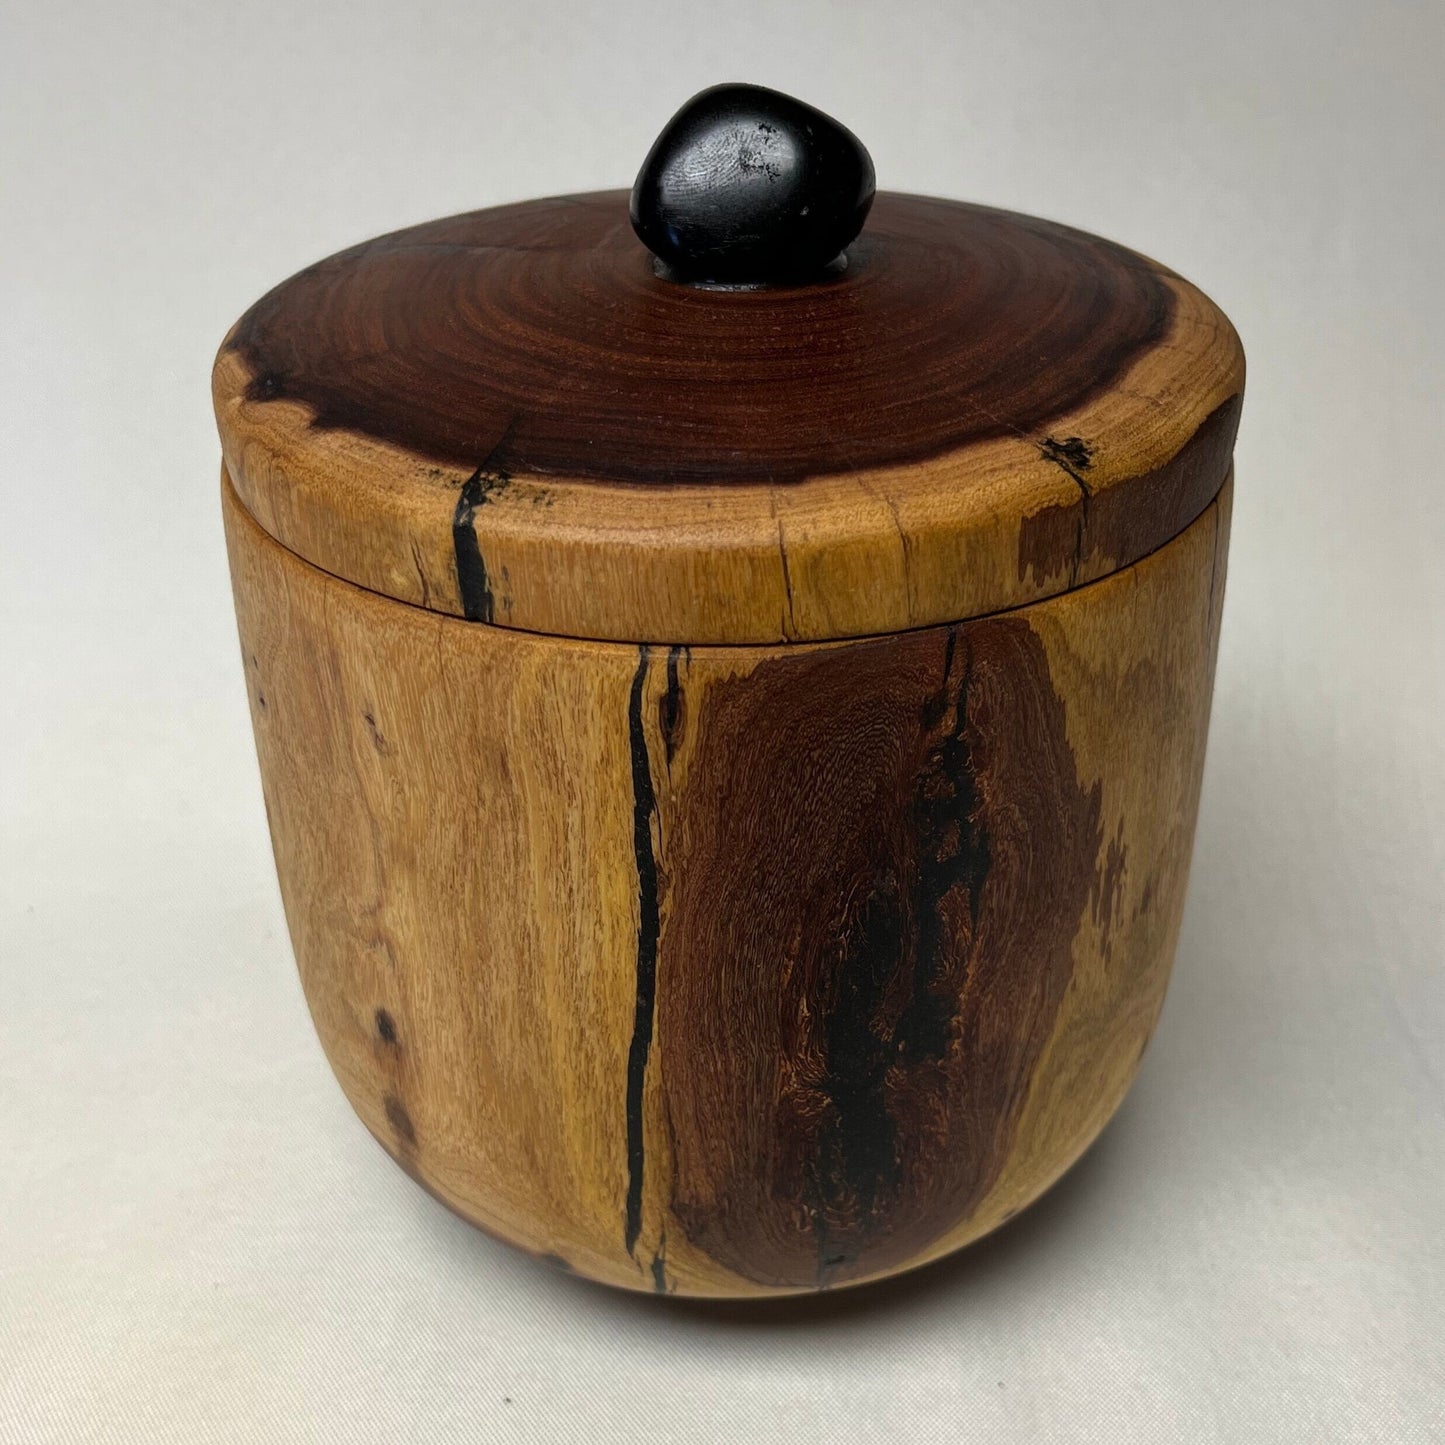 Handmade Mesquite Wood Jar with Lid, Made in USA